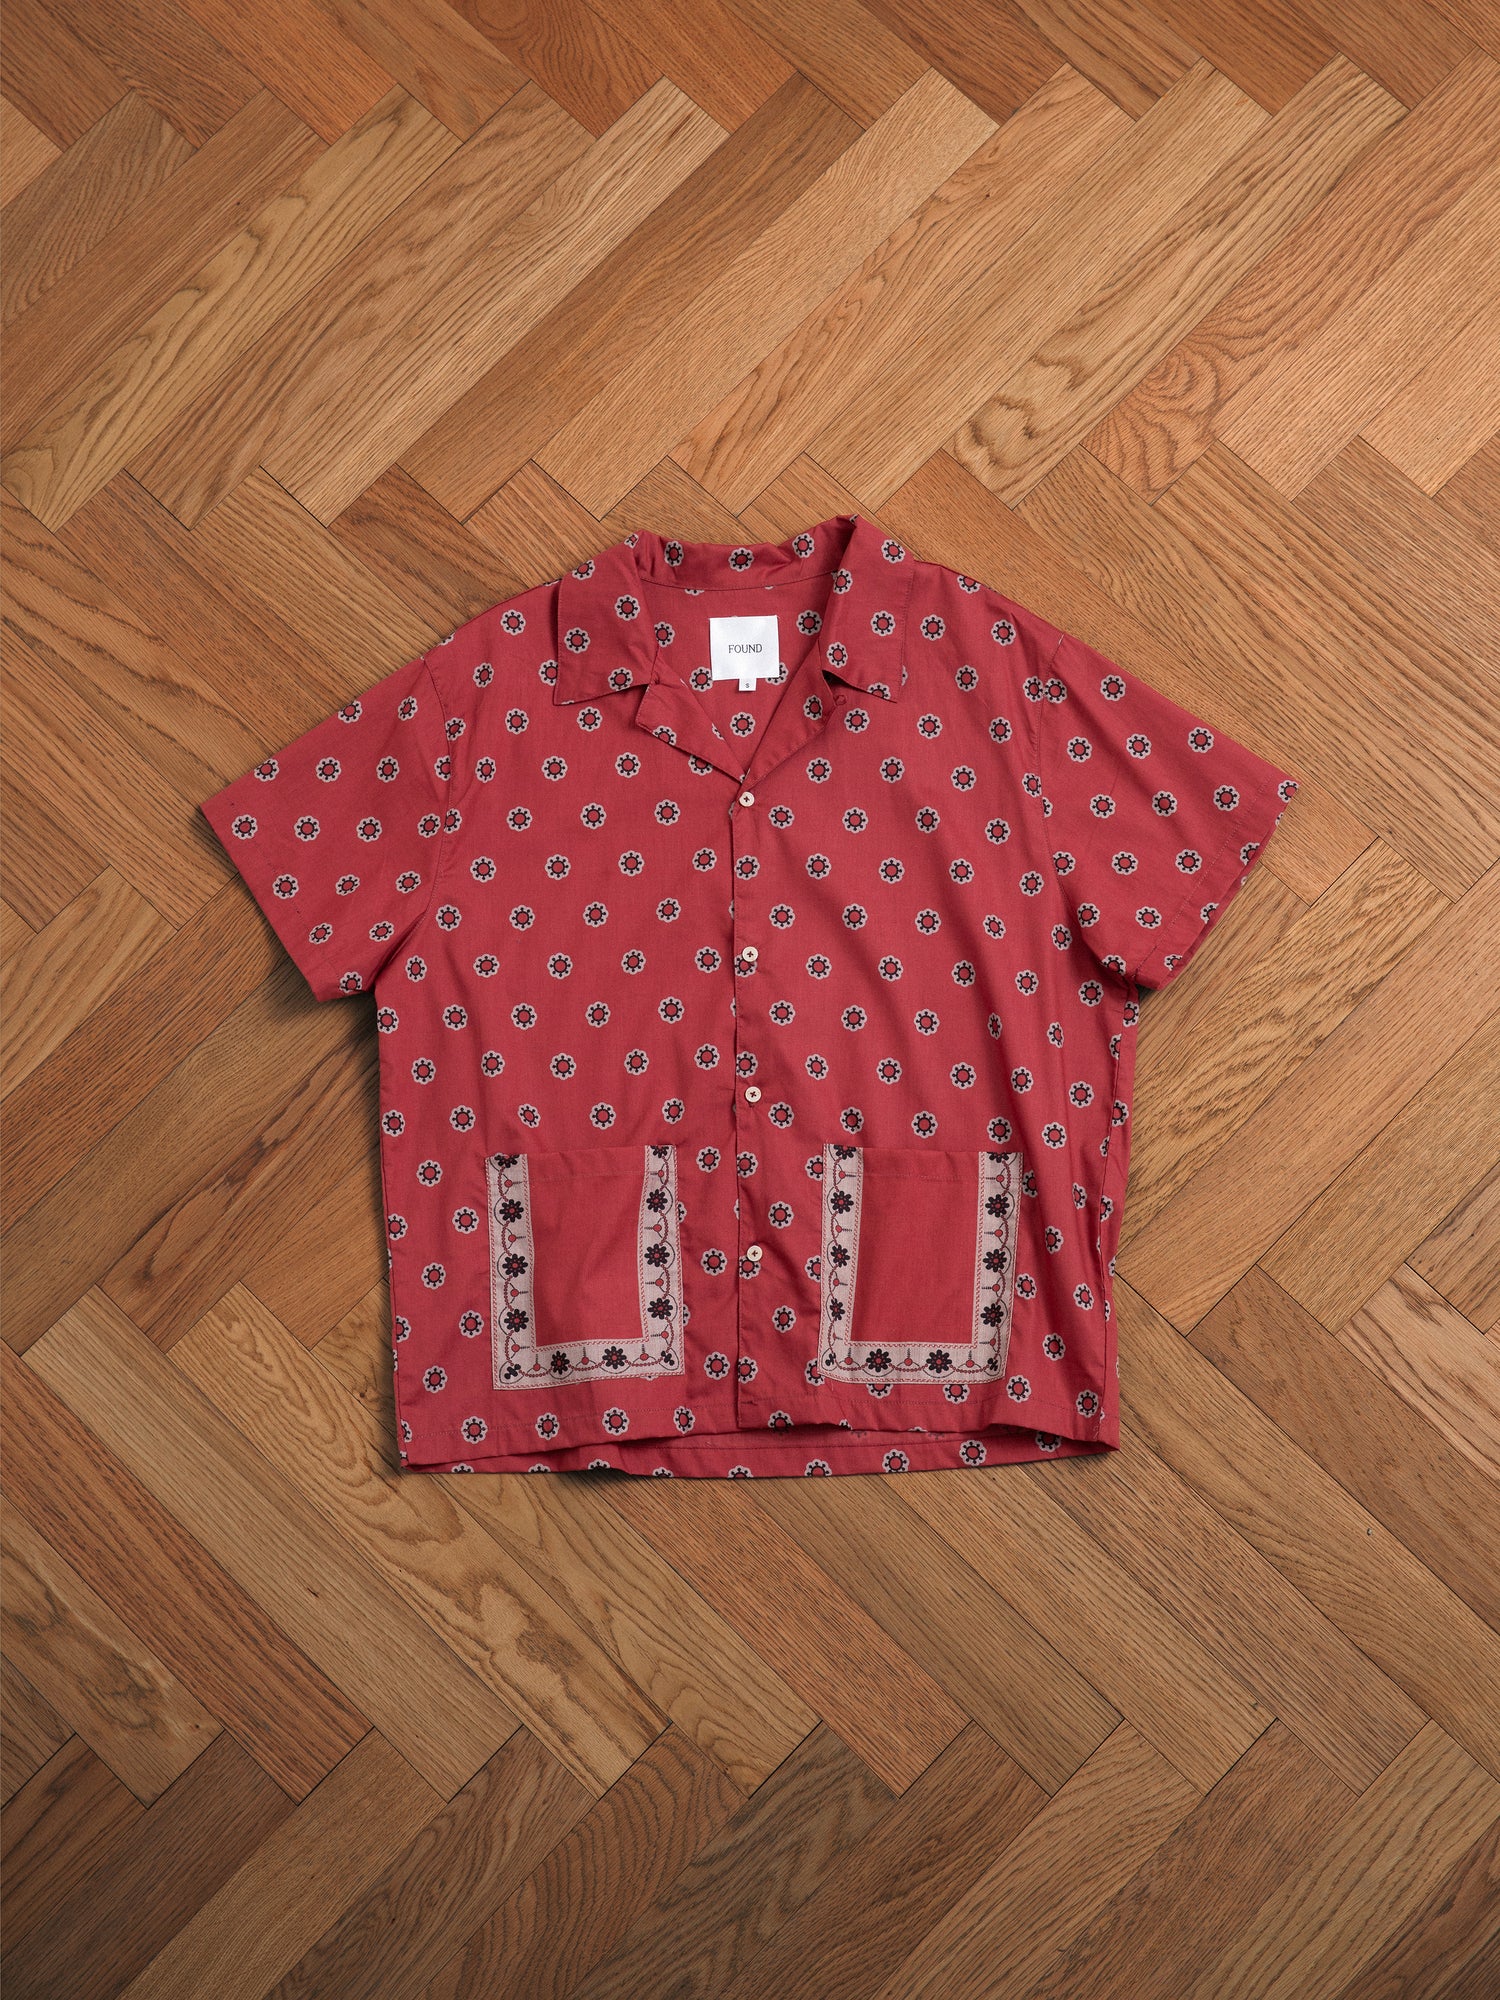 A Found Red Motif SS Camp Shirt on a wooden floor.